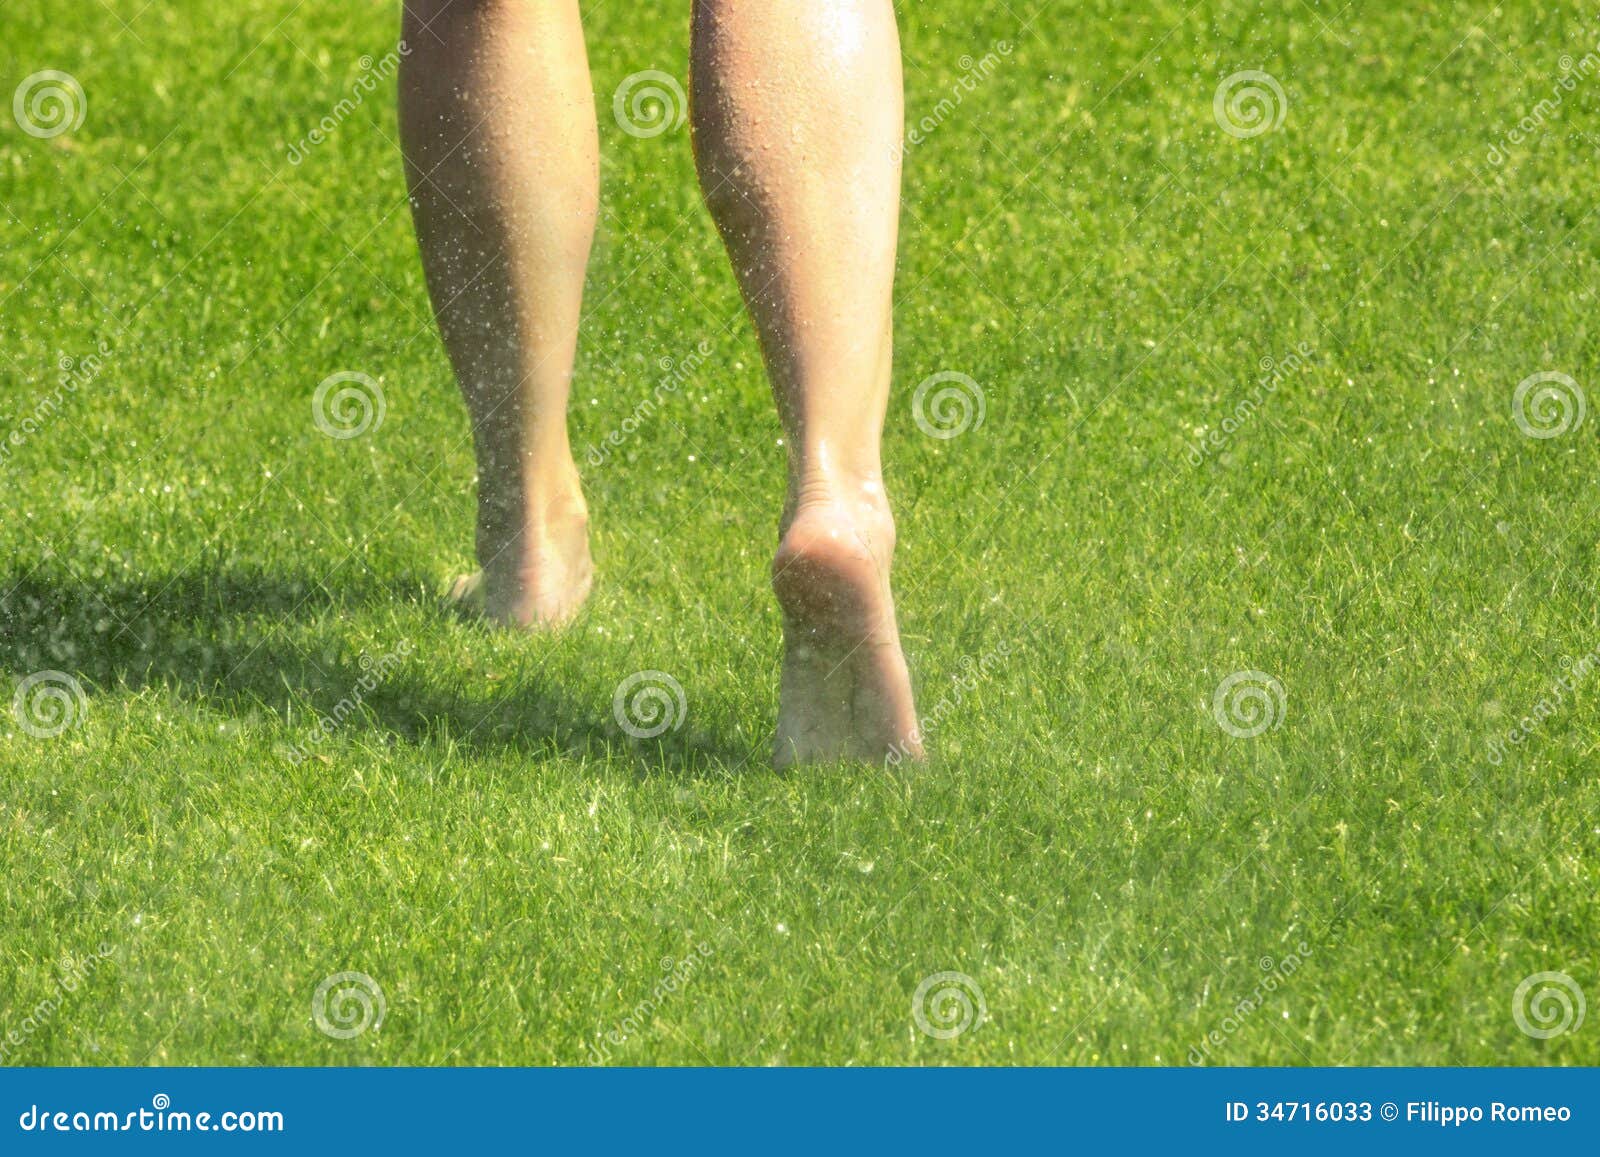 Legs On Wet Green Grass Stock Image Image Of Beauty 34716033